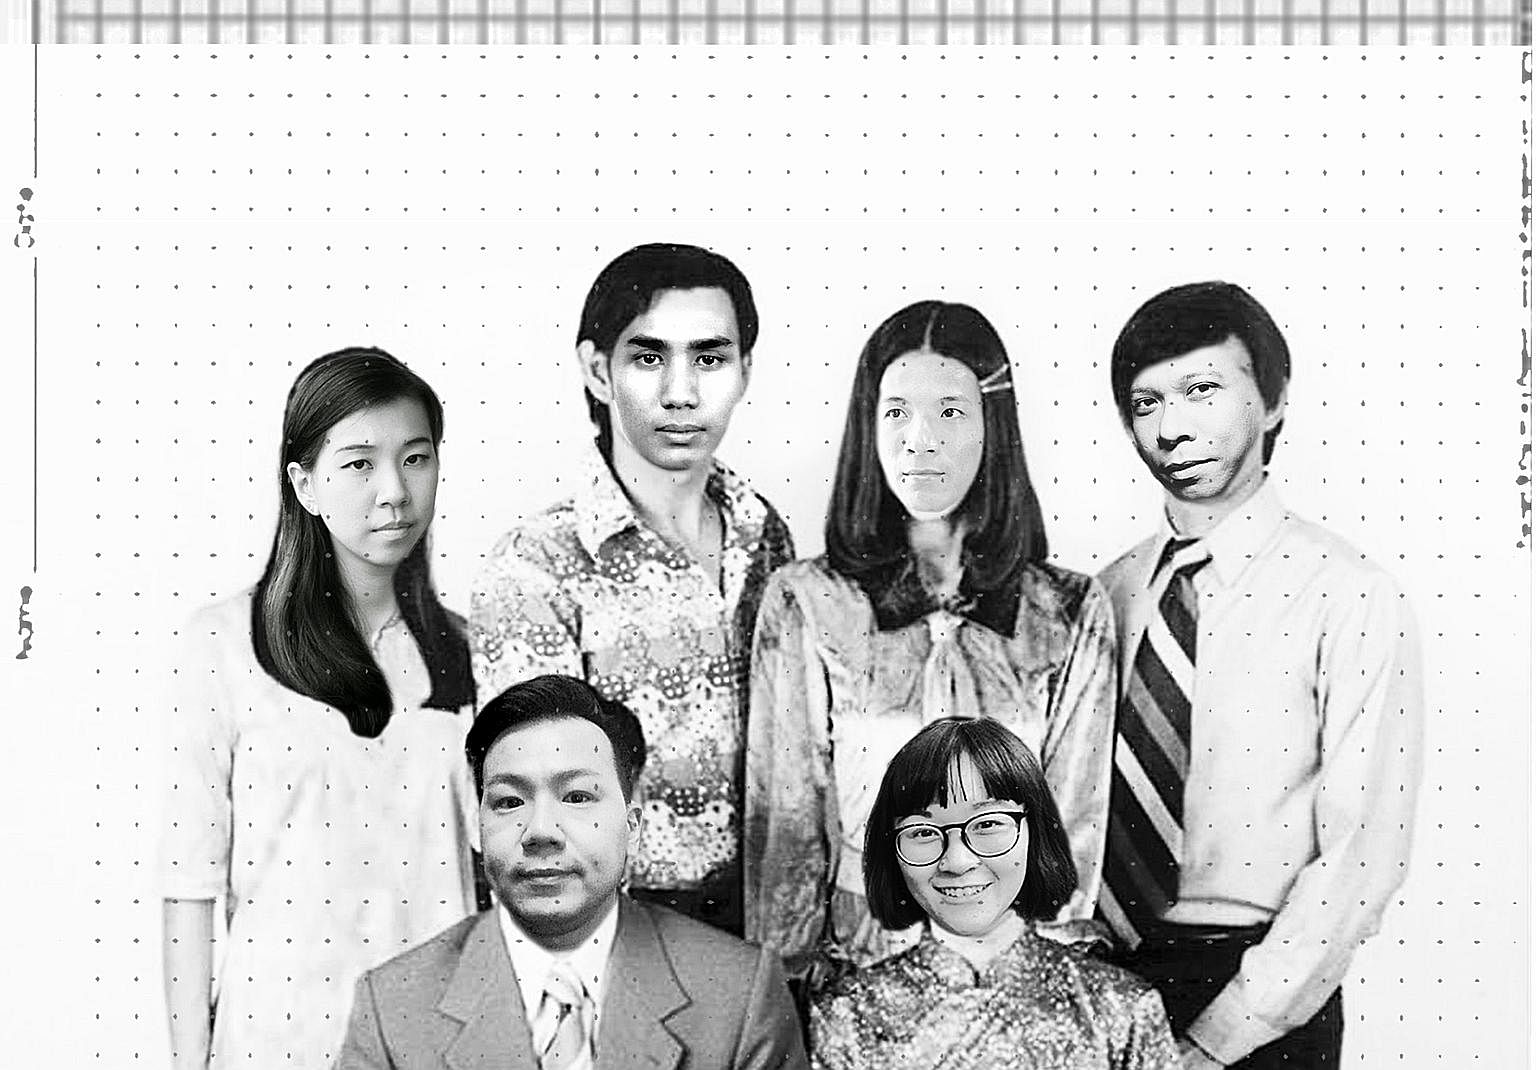 Tango's cast includes (from left) Karen Tan, Lok Meng Chue, Emil Marwa and Dylan Jenkins. (Clockwise from top left) Cheryl Ong from SA, Safuan Johari from Nada, new media artist Brandon Tay, Rizman Putra from Nada, and Natalie Tse and Andy Chia from 